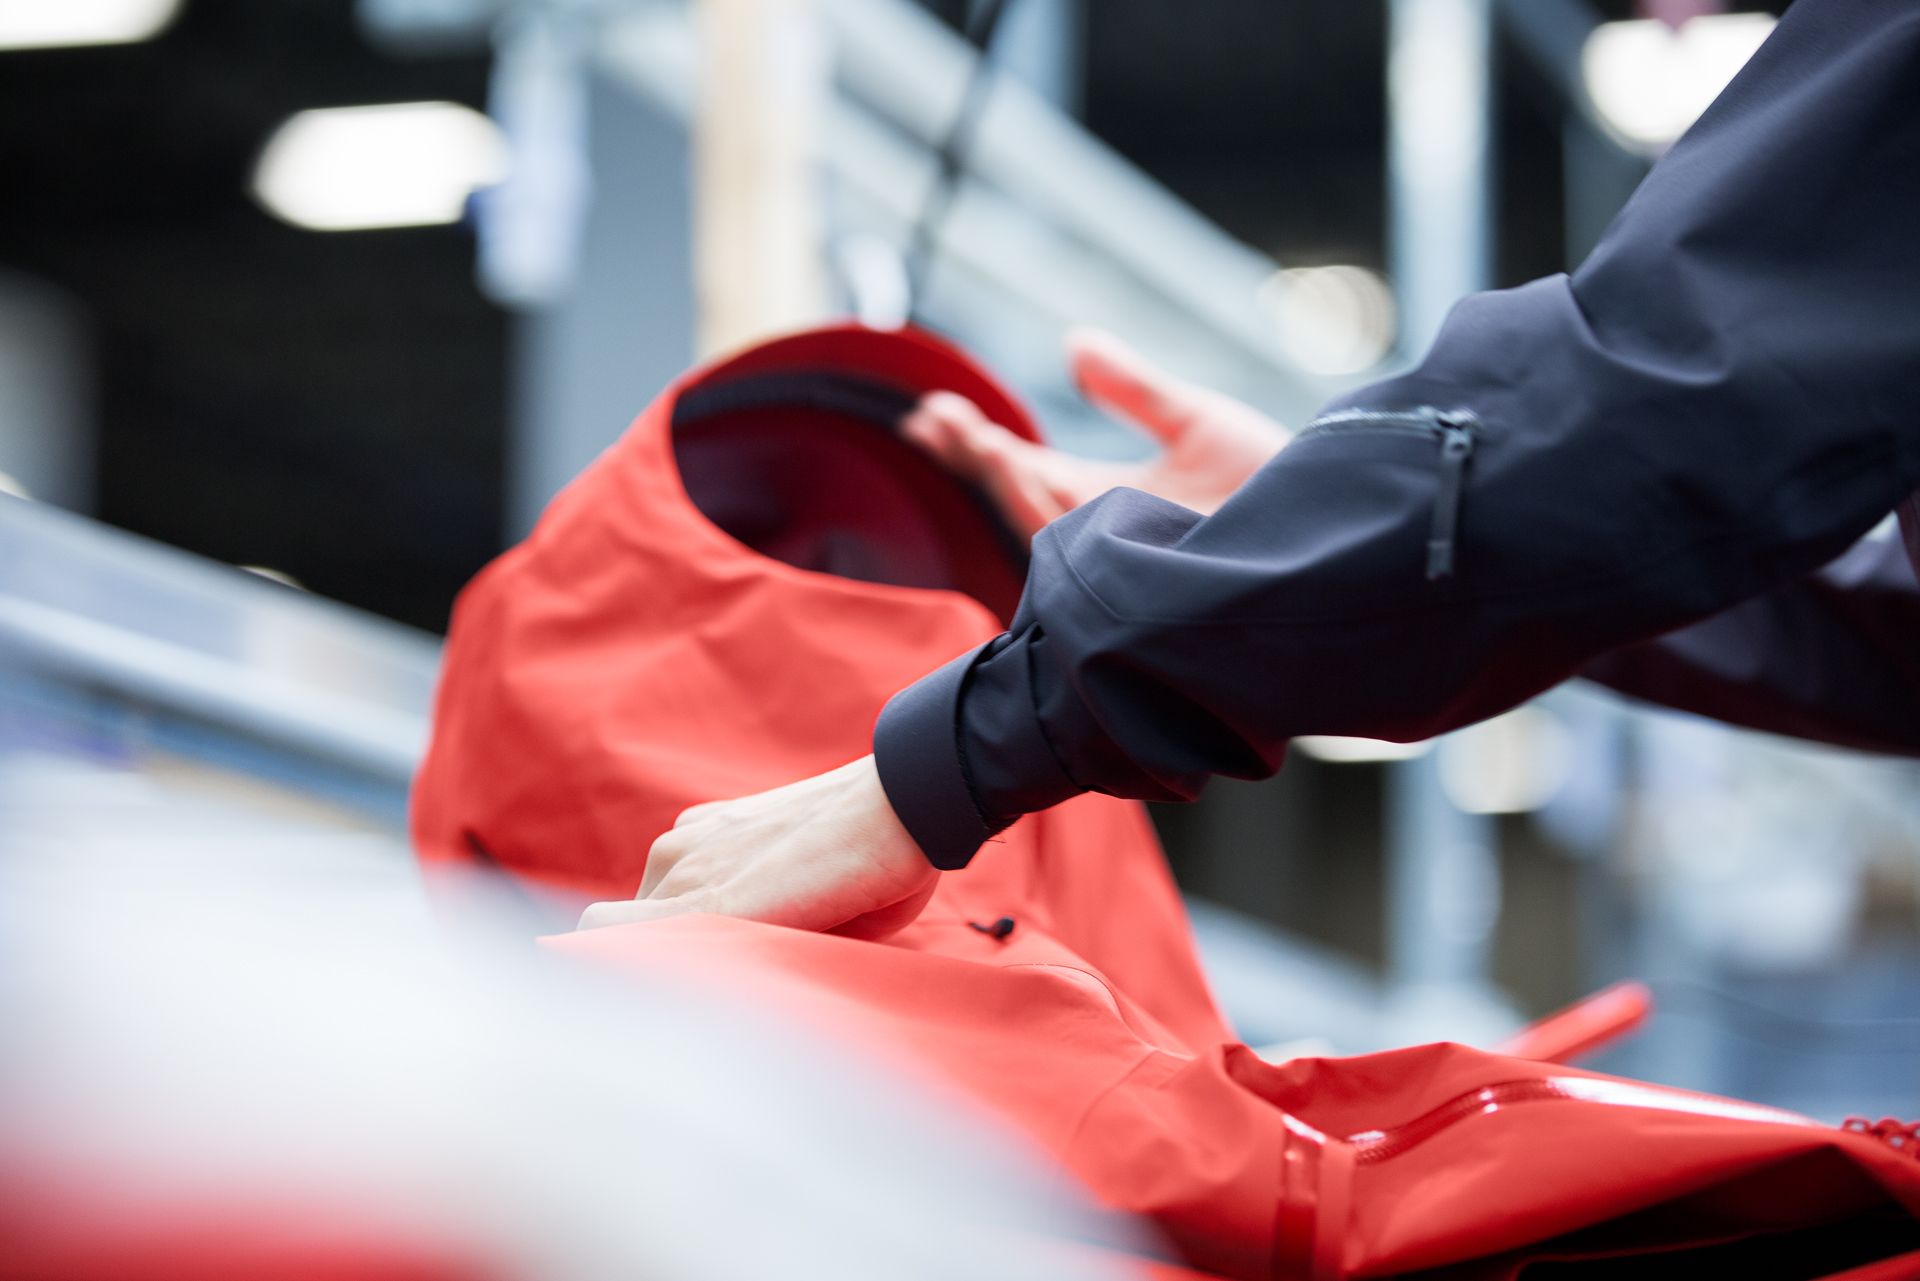 Everything That Goes Into Making an Arc'teryx Jacket